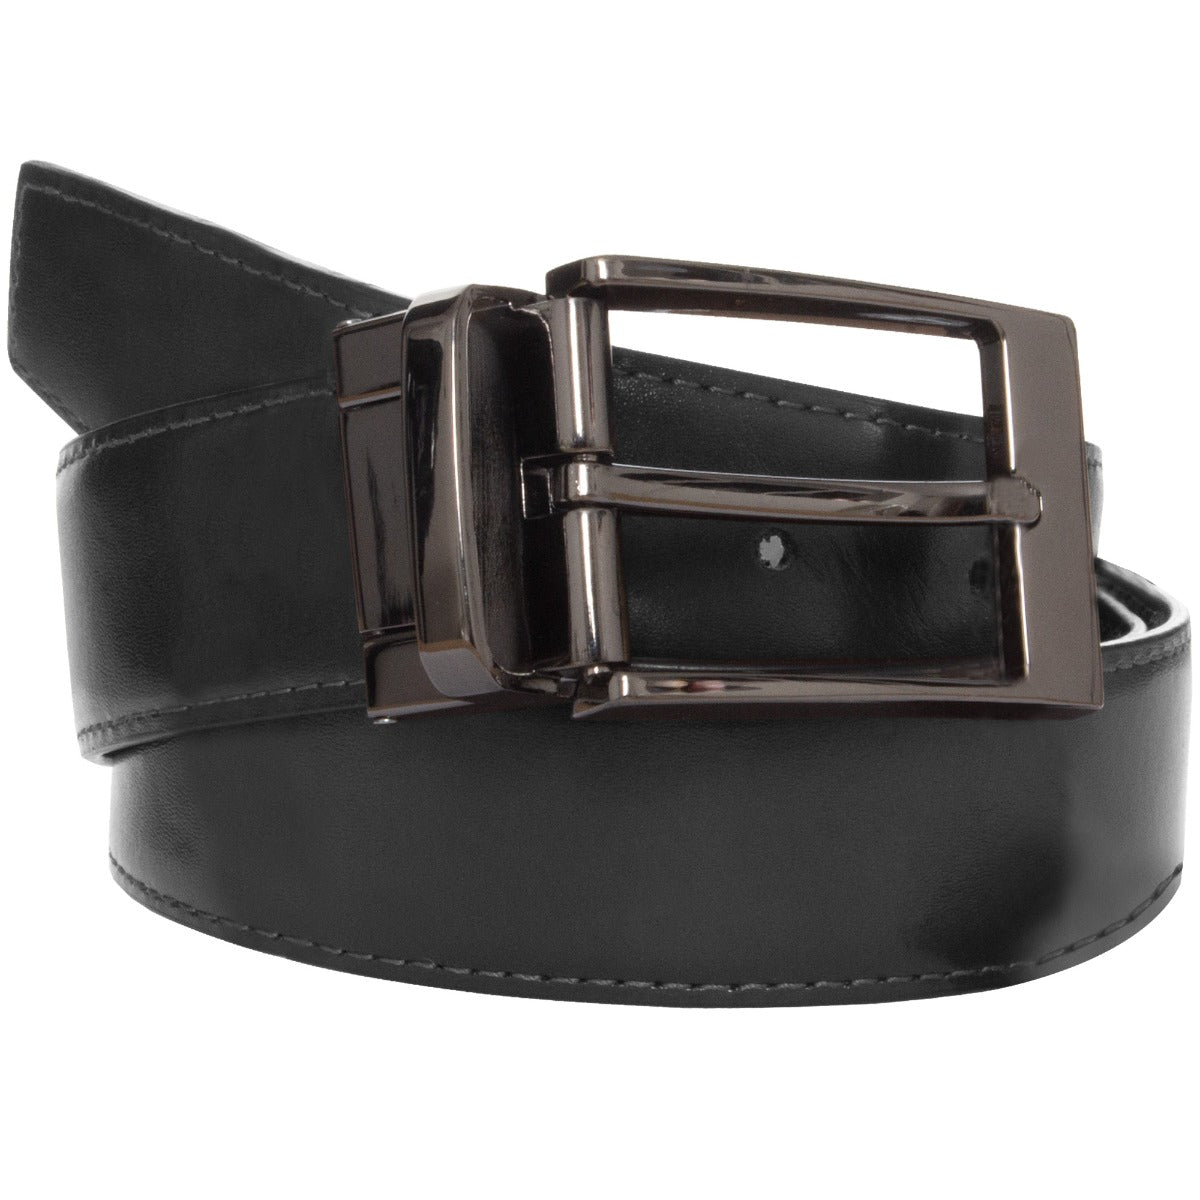 Accessories | Mens Genuine Leather Belt With Reversible Buckle Belt